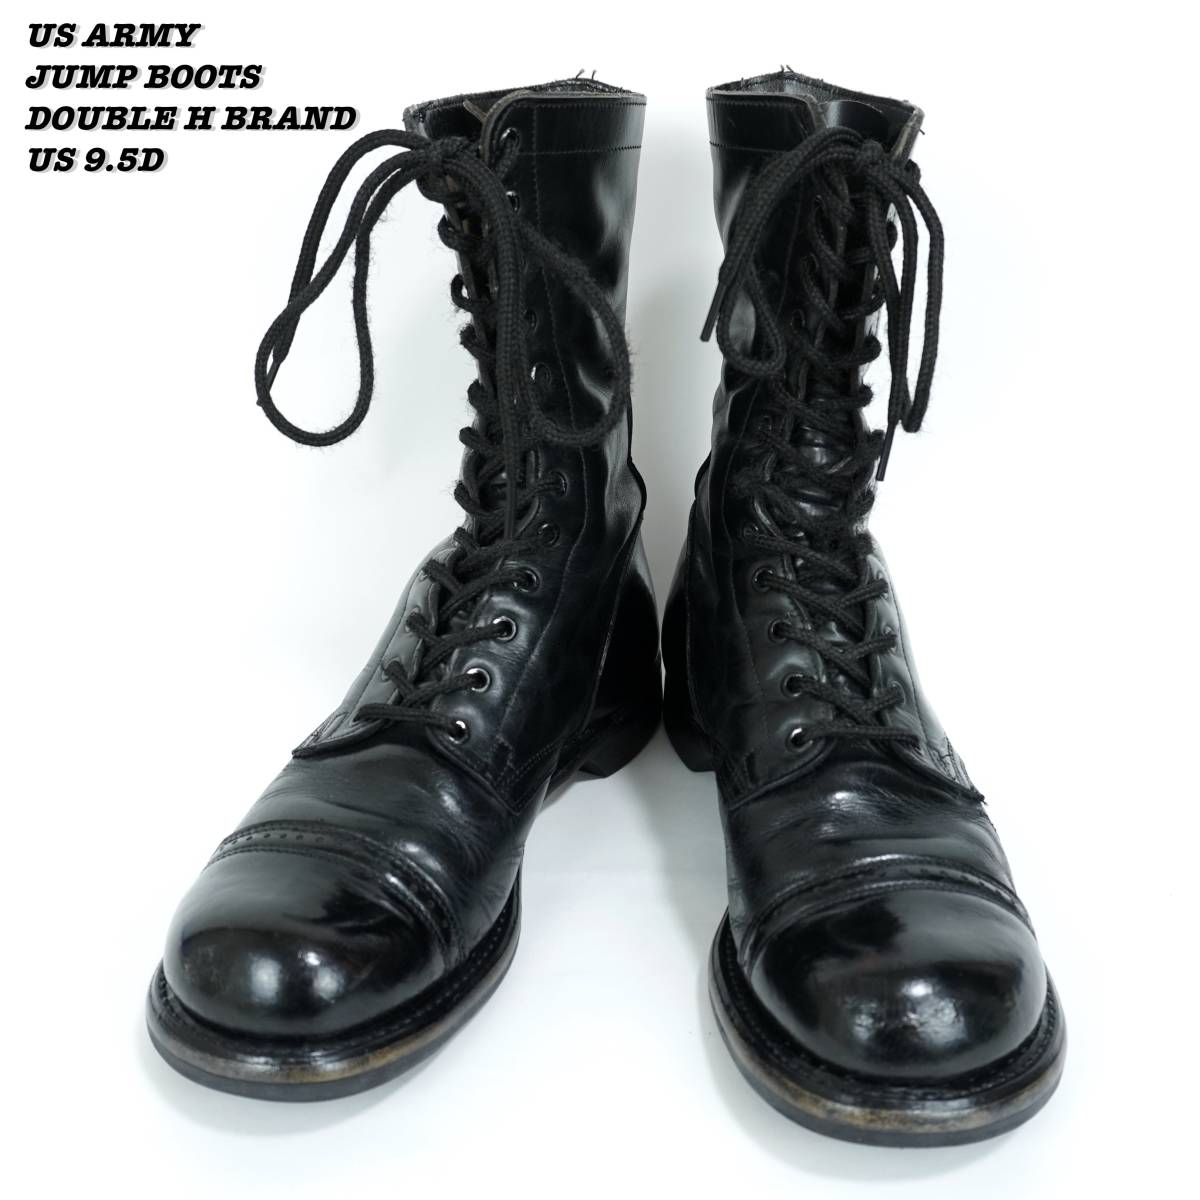 US ARMY DOUBLE H BRAND JUMP BOOTS US9.5D Vintage アメリカ軍